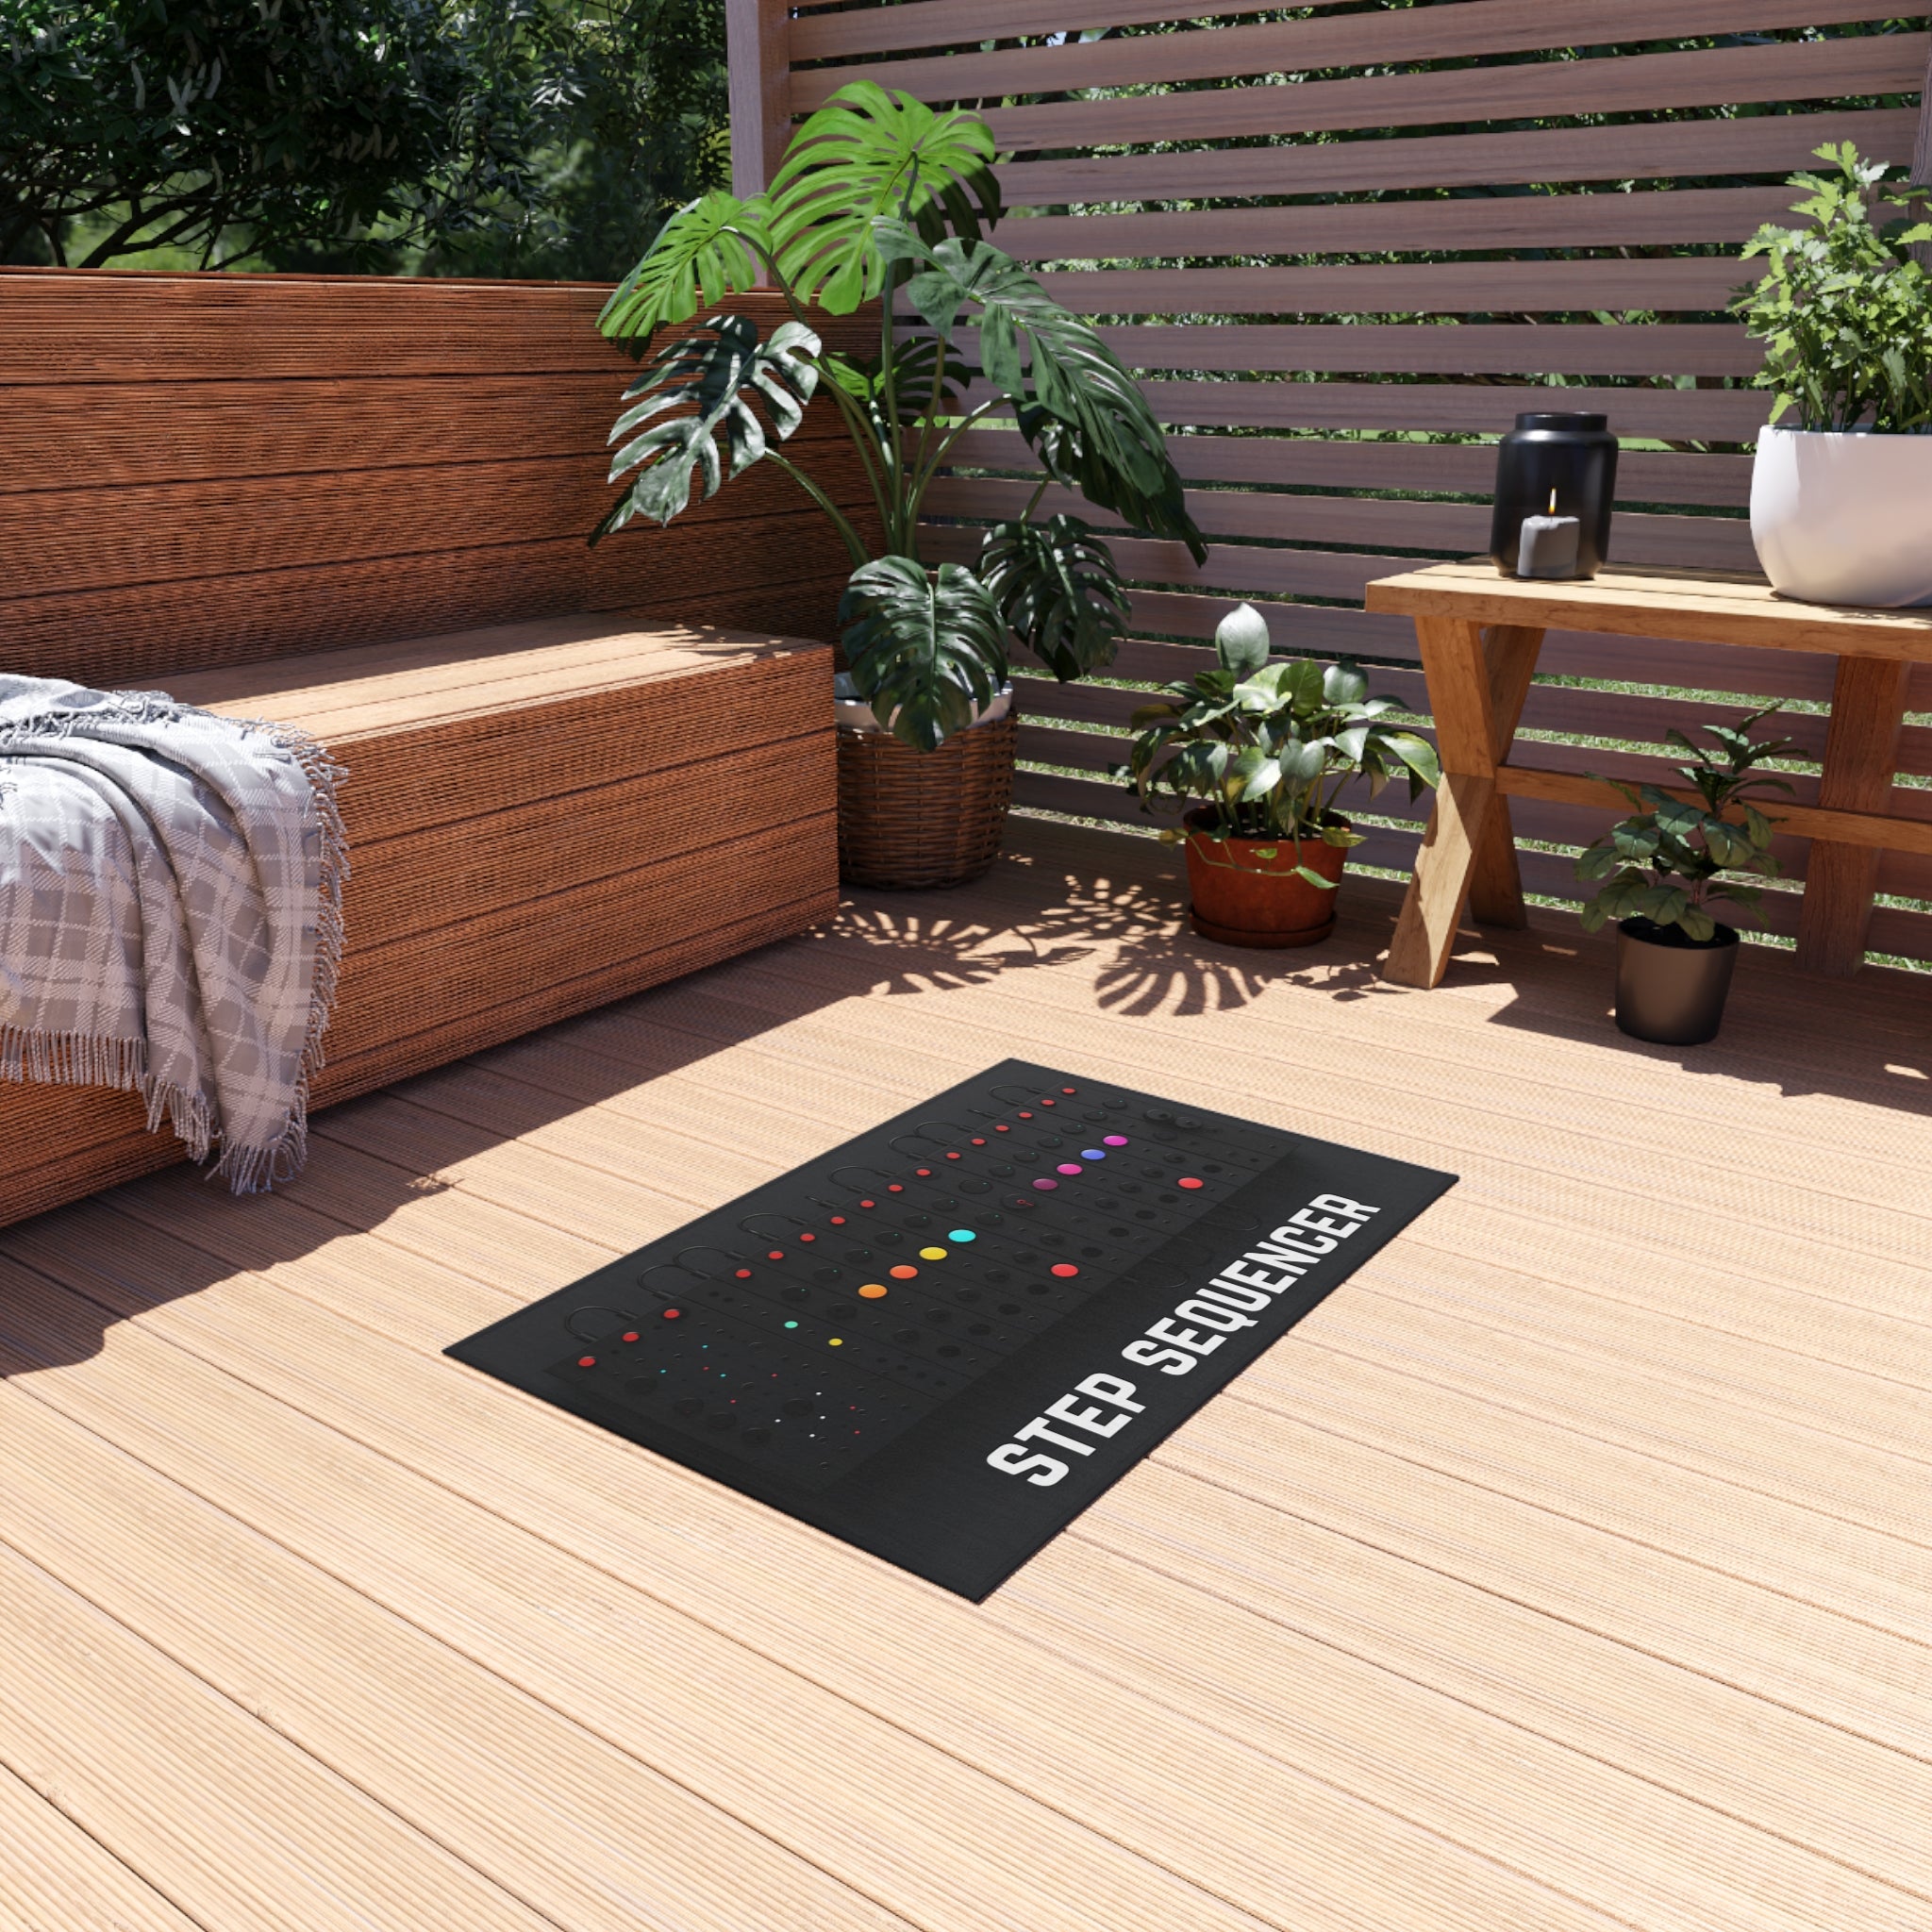 A large rectangular rug on a wooden deck features a detailed print of a synthesizer keyboard with the words 'USE THE FLOOR' printed below it, mimicking the design and layout of a classic musical keyboard. The rug is placed in an outdoor seating area with a cozy corner bench, a throw blanket, and potted plants, creating a relaxed and creative atmosphere